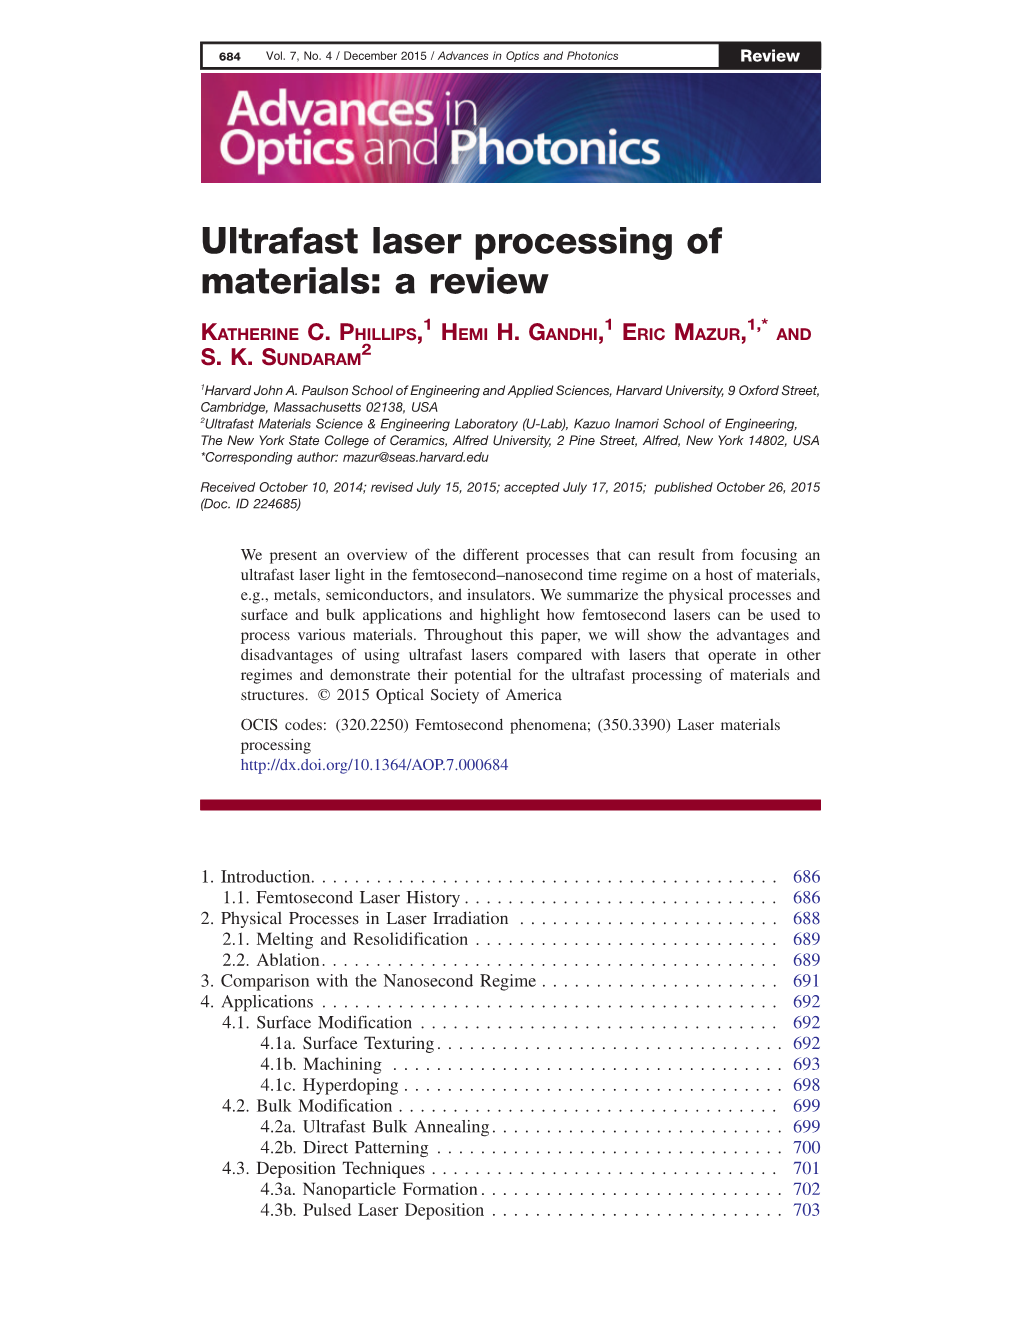 Ultrafast Laser Processing of Materials: a Review